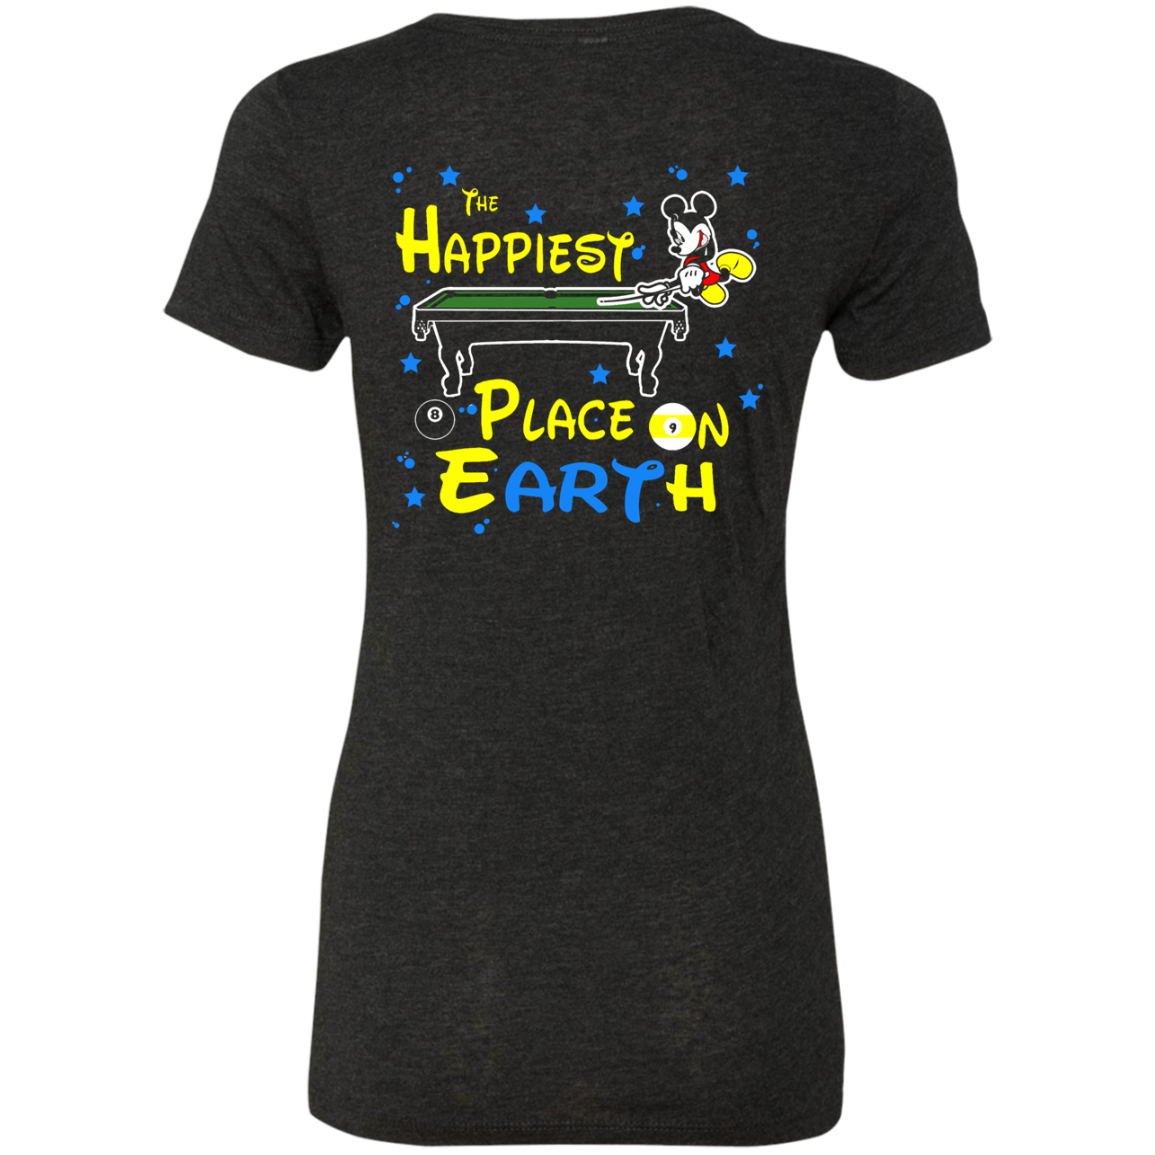 The GHOATS custom design #14. The Happiest Place On Earth. Fan Art. Ladies' Triblend T-Shirt